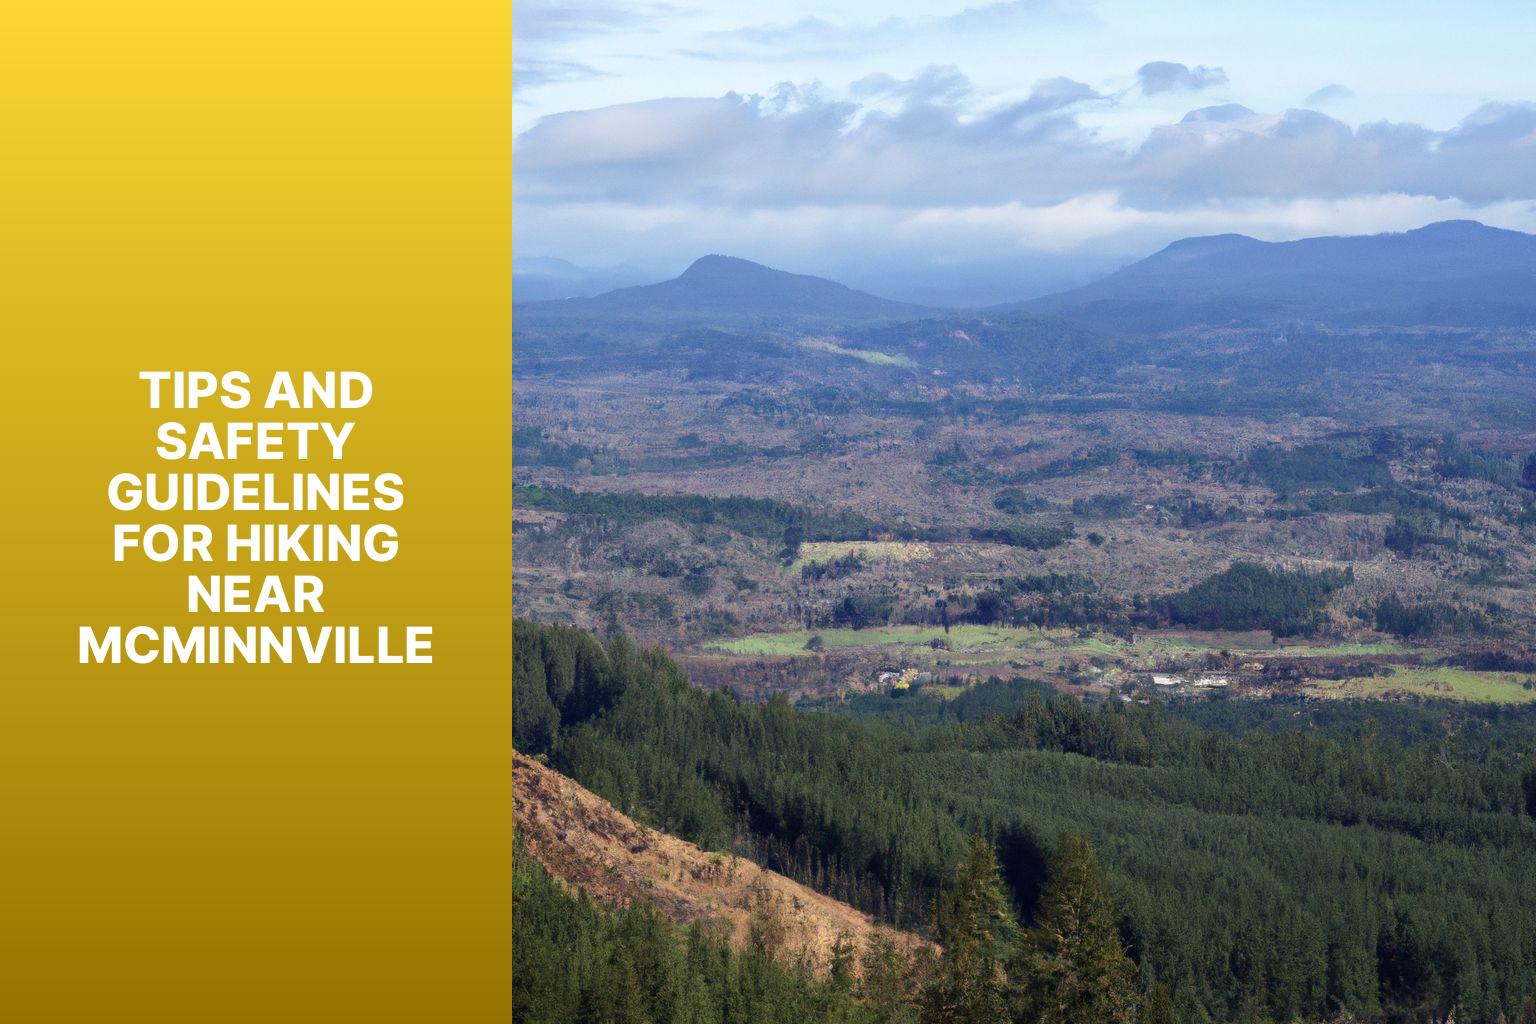 Tips and Safety Guidelines for Hiking near McMinnville - Hikes Near Mcminnville 